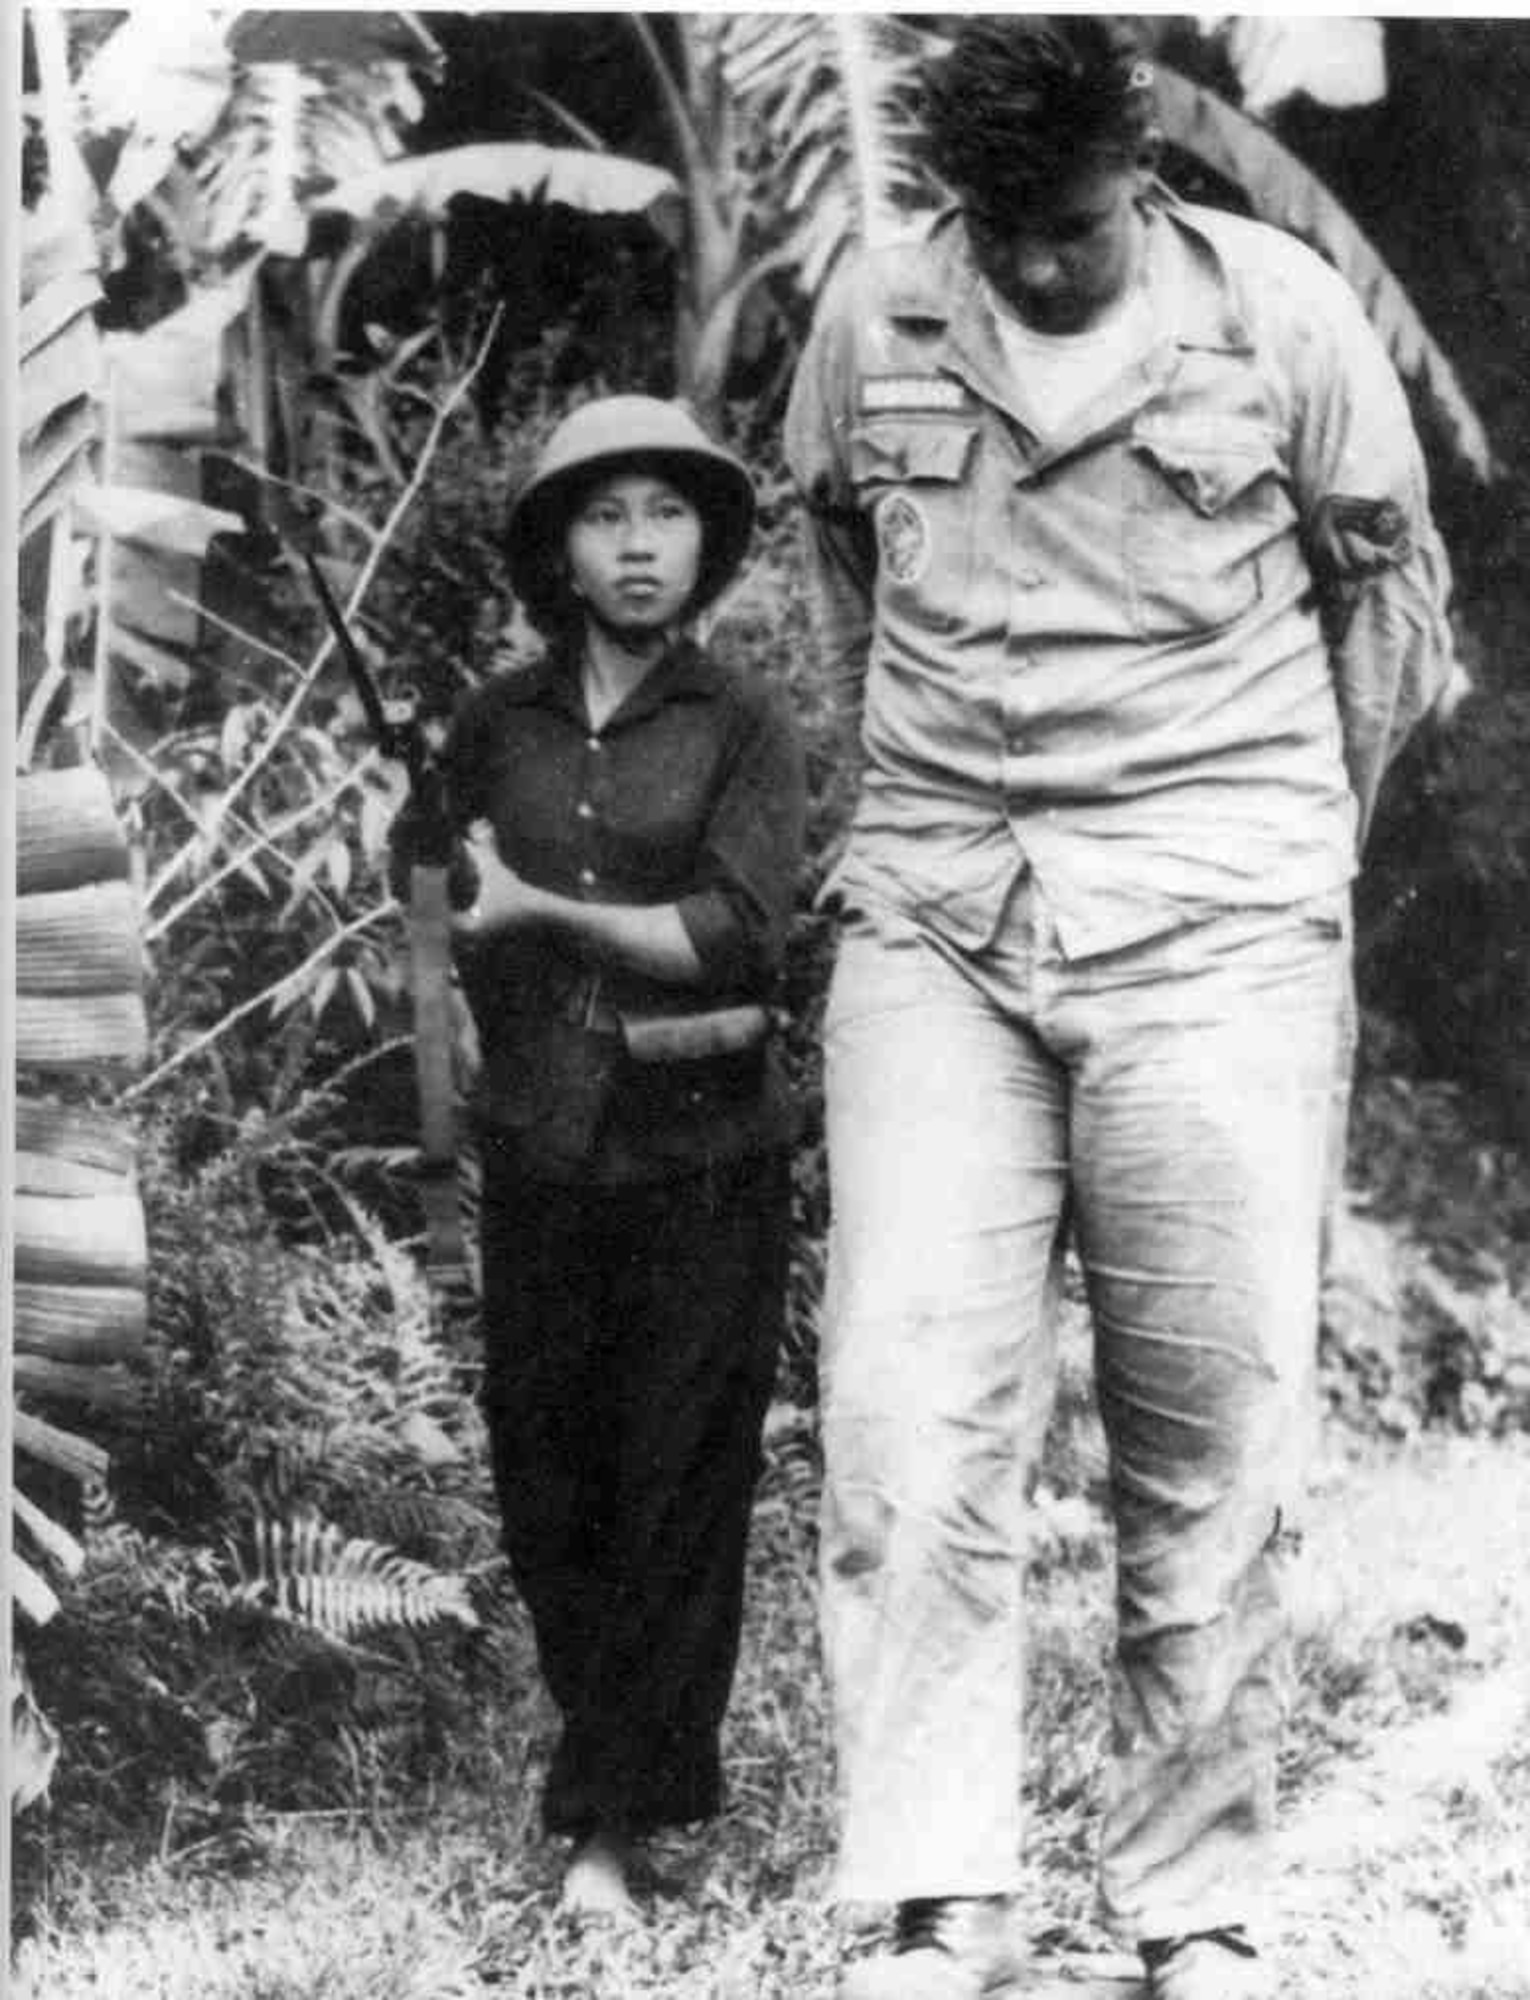 POW Airman First Class Bill Robinson is guarded by a North Vietnamese soldier after his capture on September 20, 1965.  (USAF Photo)